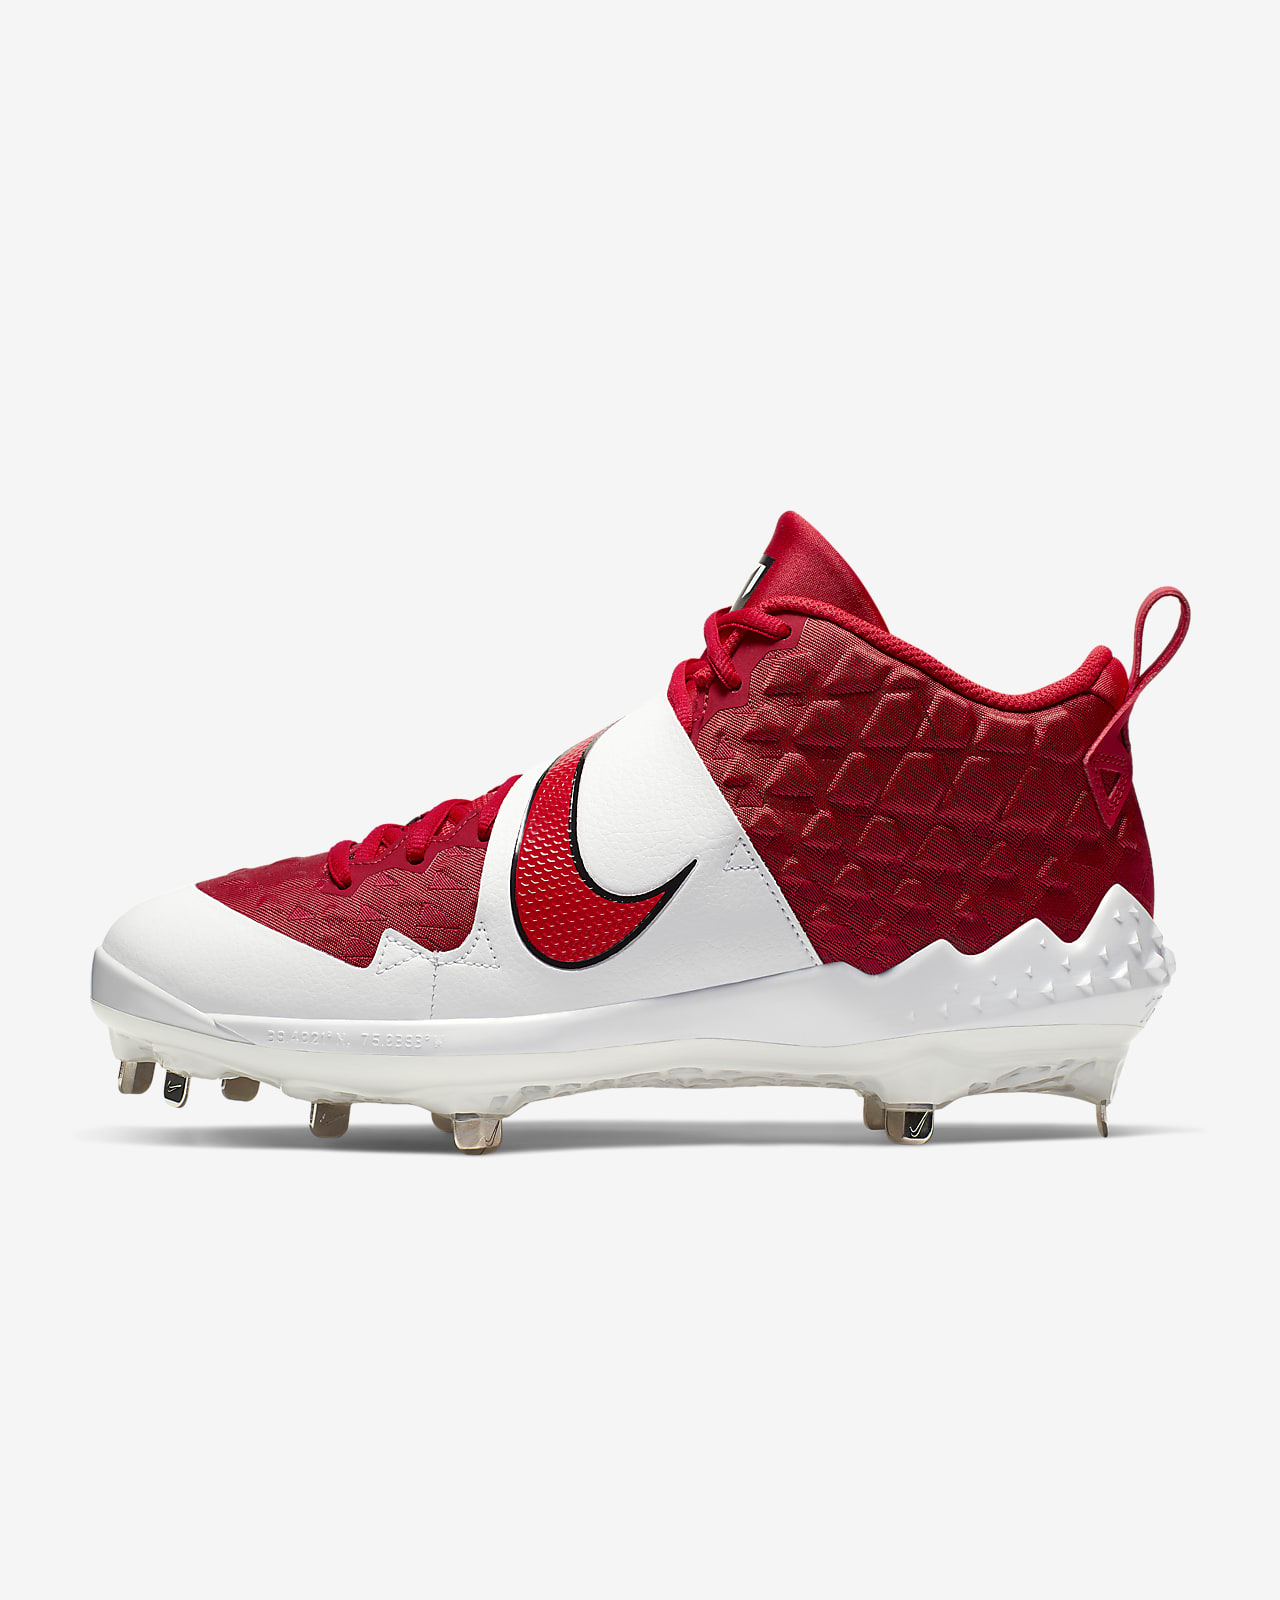 mike trout cleats red